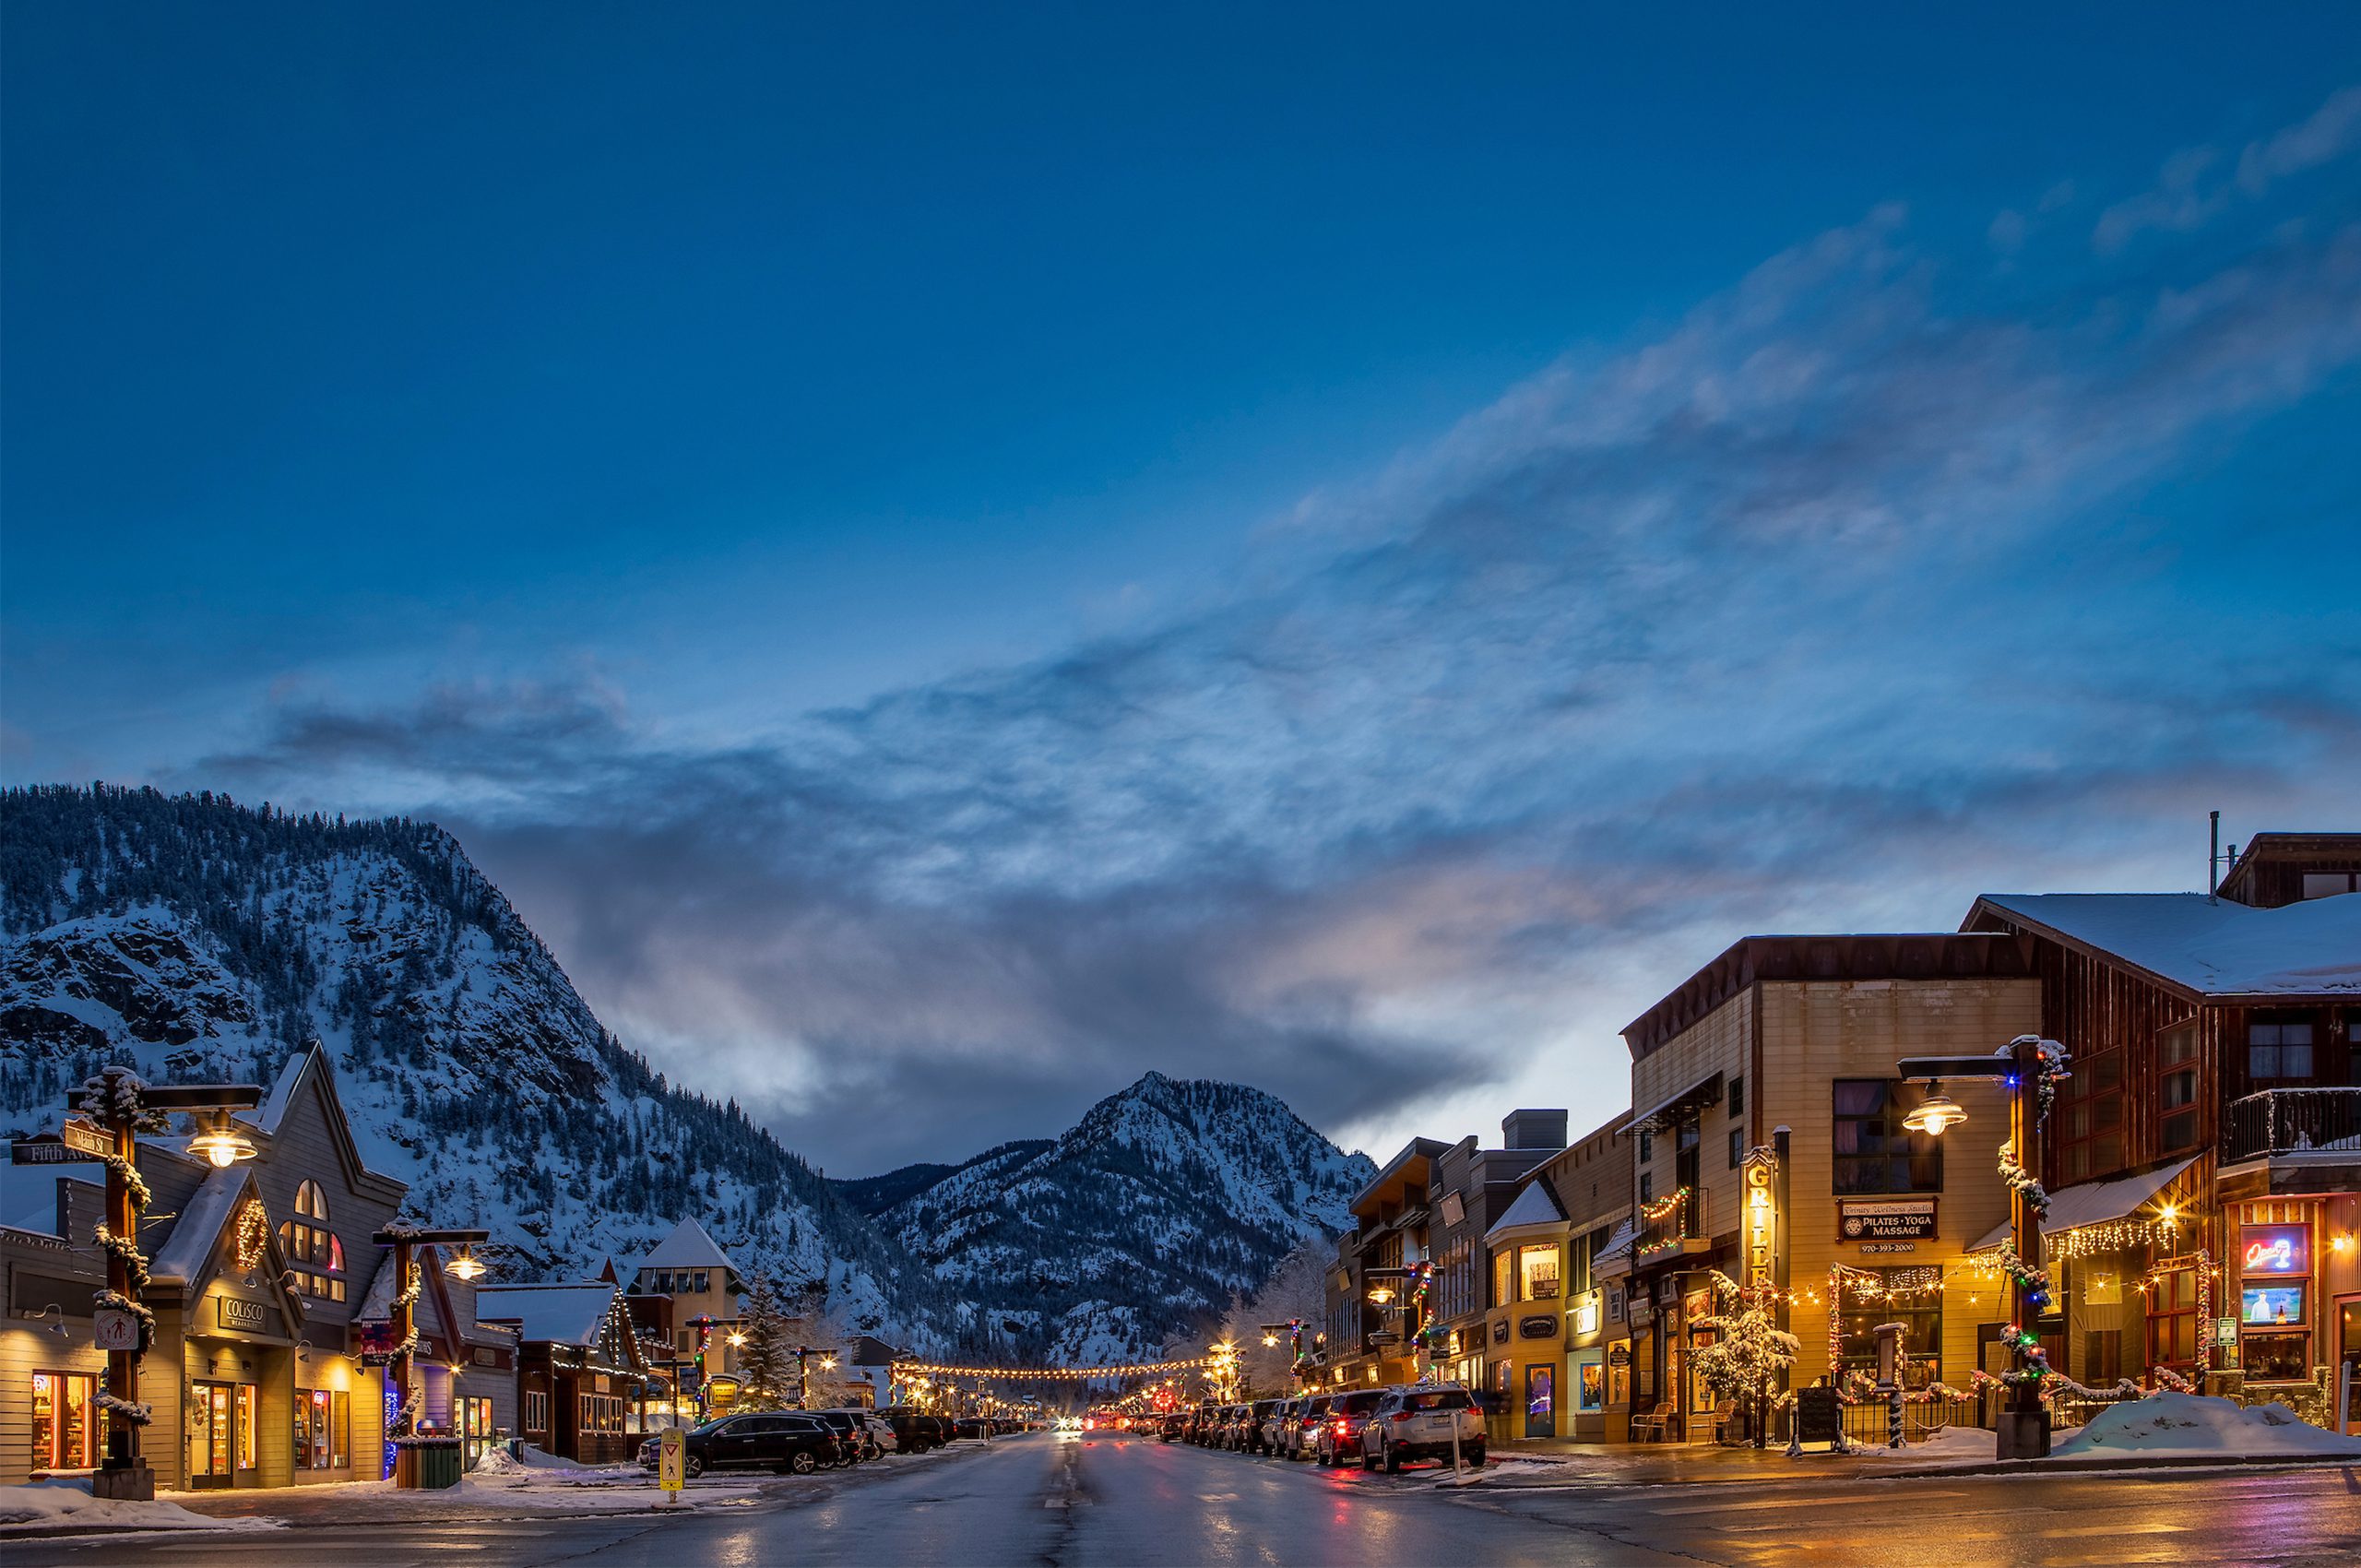 Frisco Main Street at 5th Avenue at dusk in winter